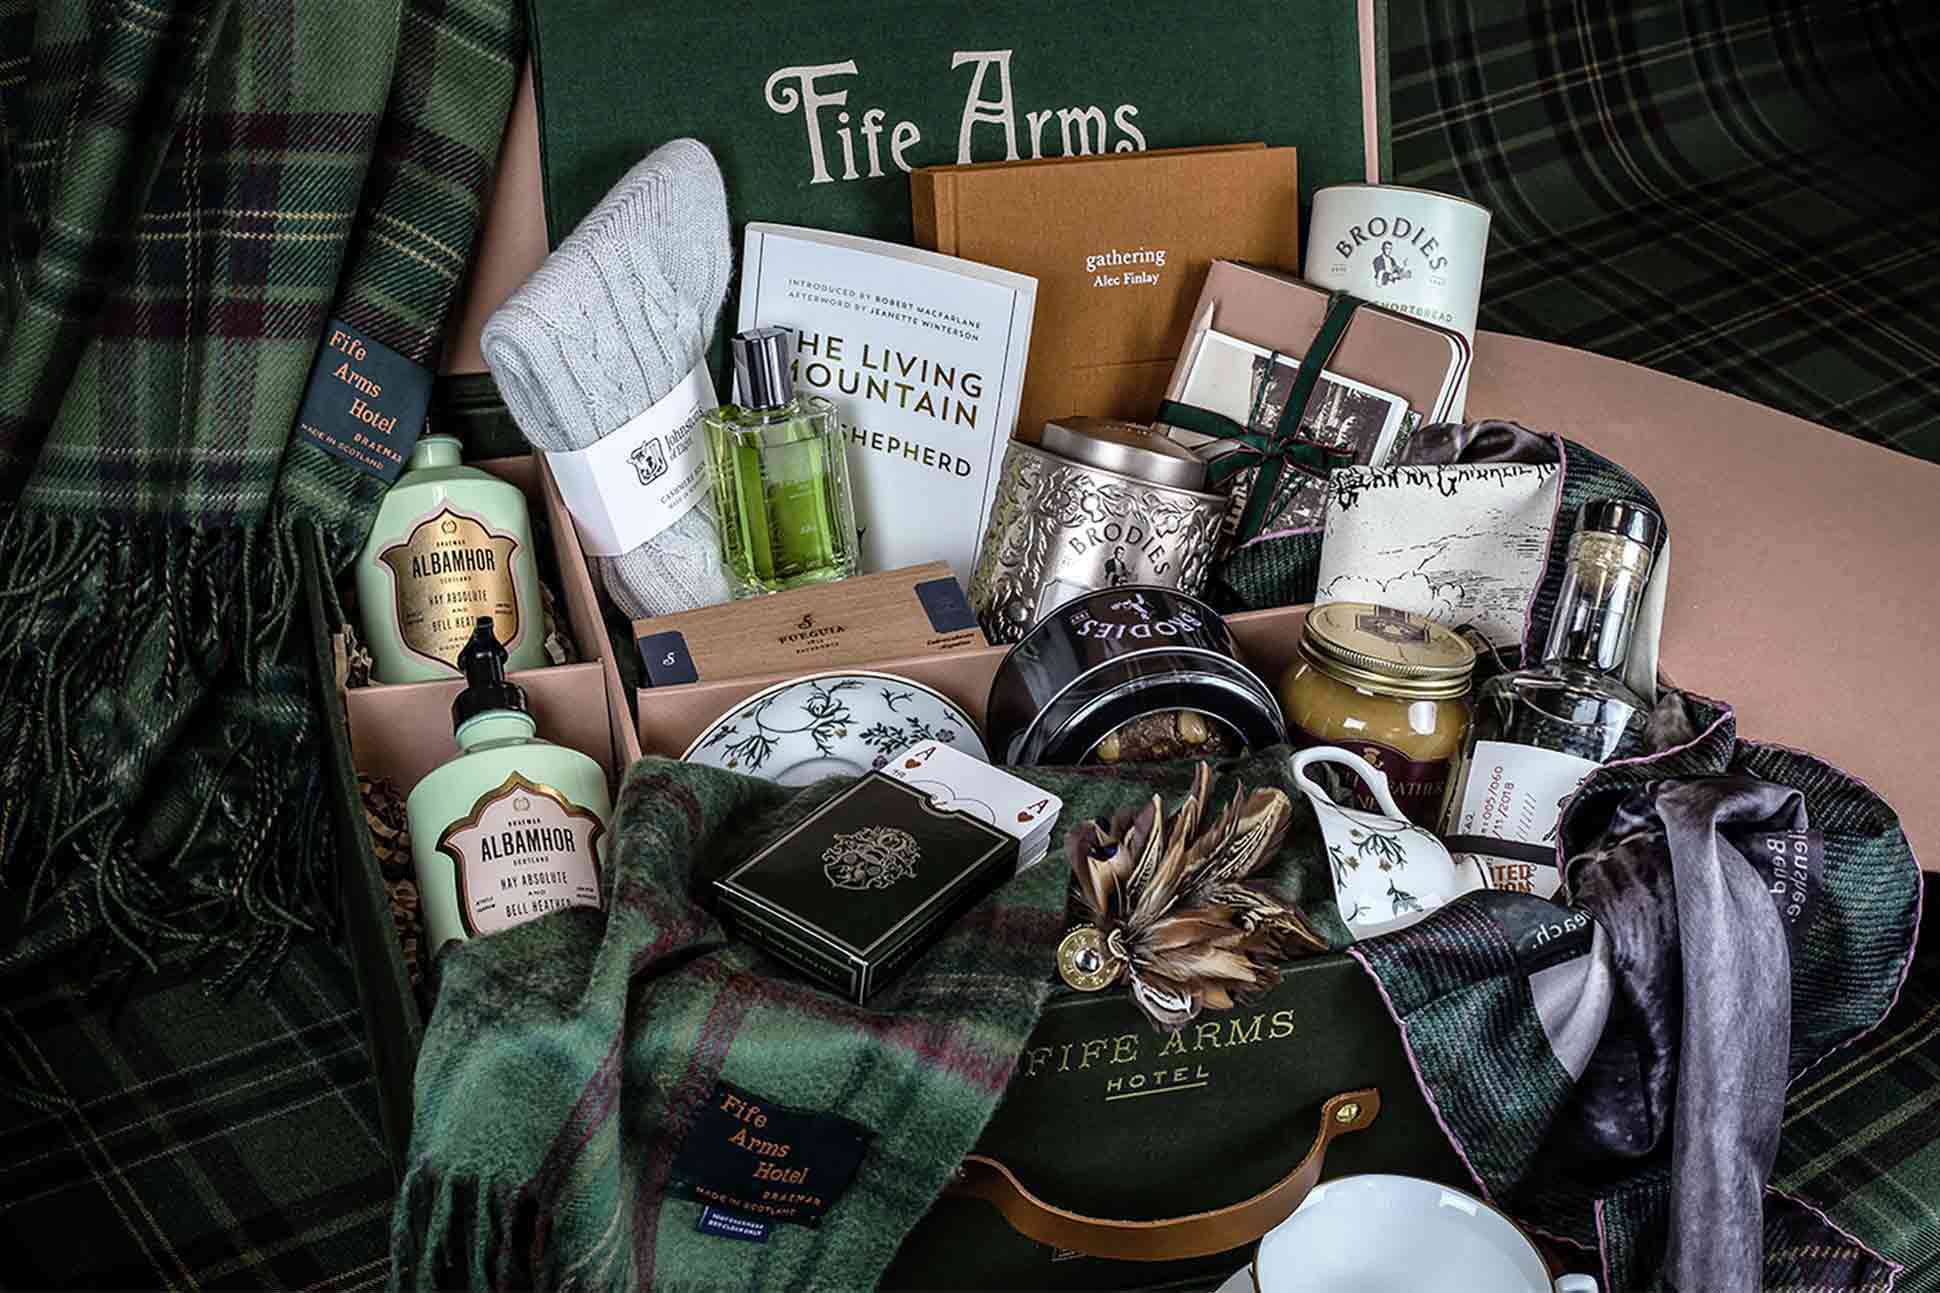 The Victoriana Hamper, available from the online shop of The Fife Arms, Braemar, Scotland